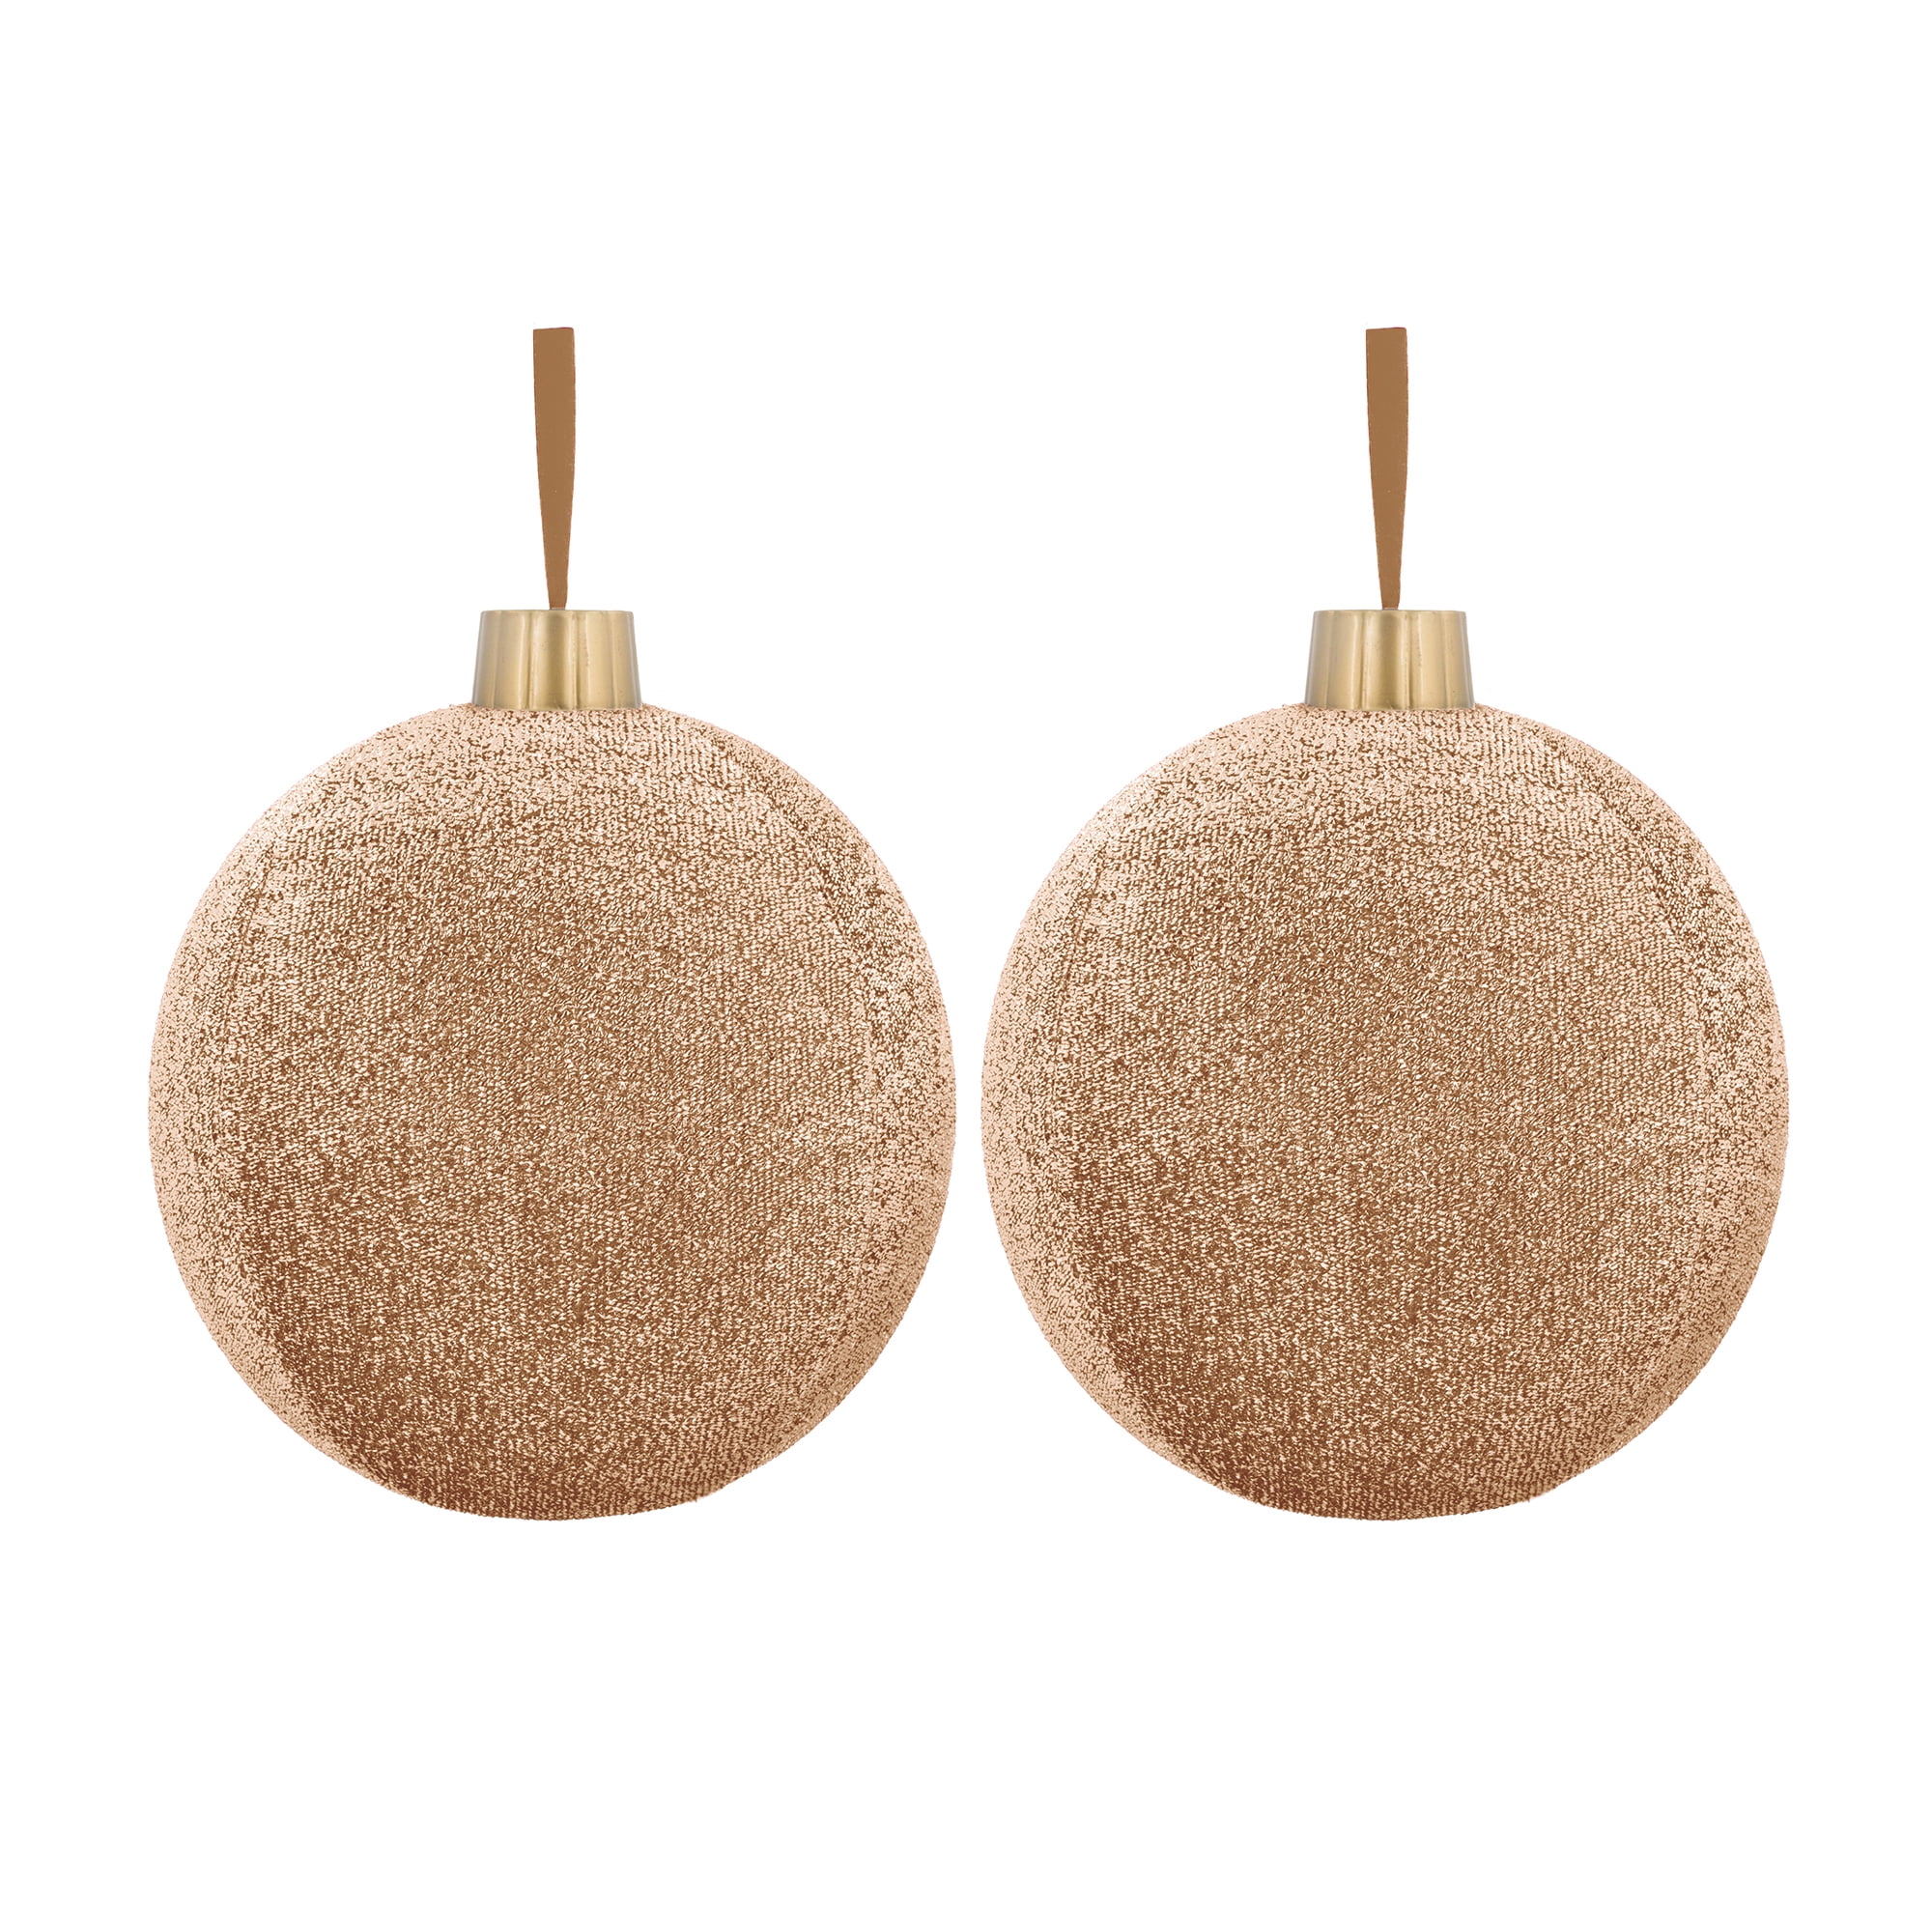 Holiday Time Christmas Inflatable Gold Tinsel Ornament 2 Pack, 12"